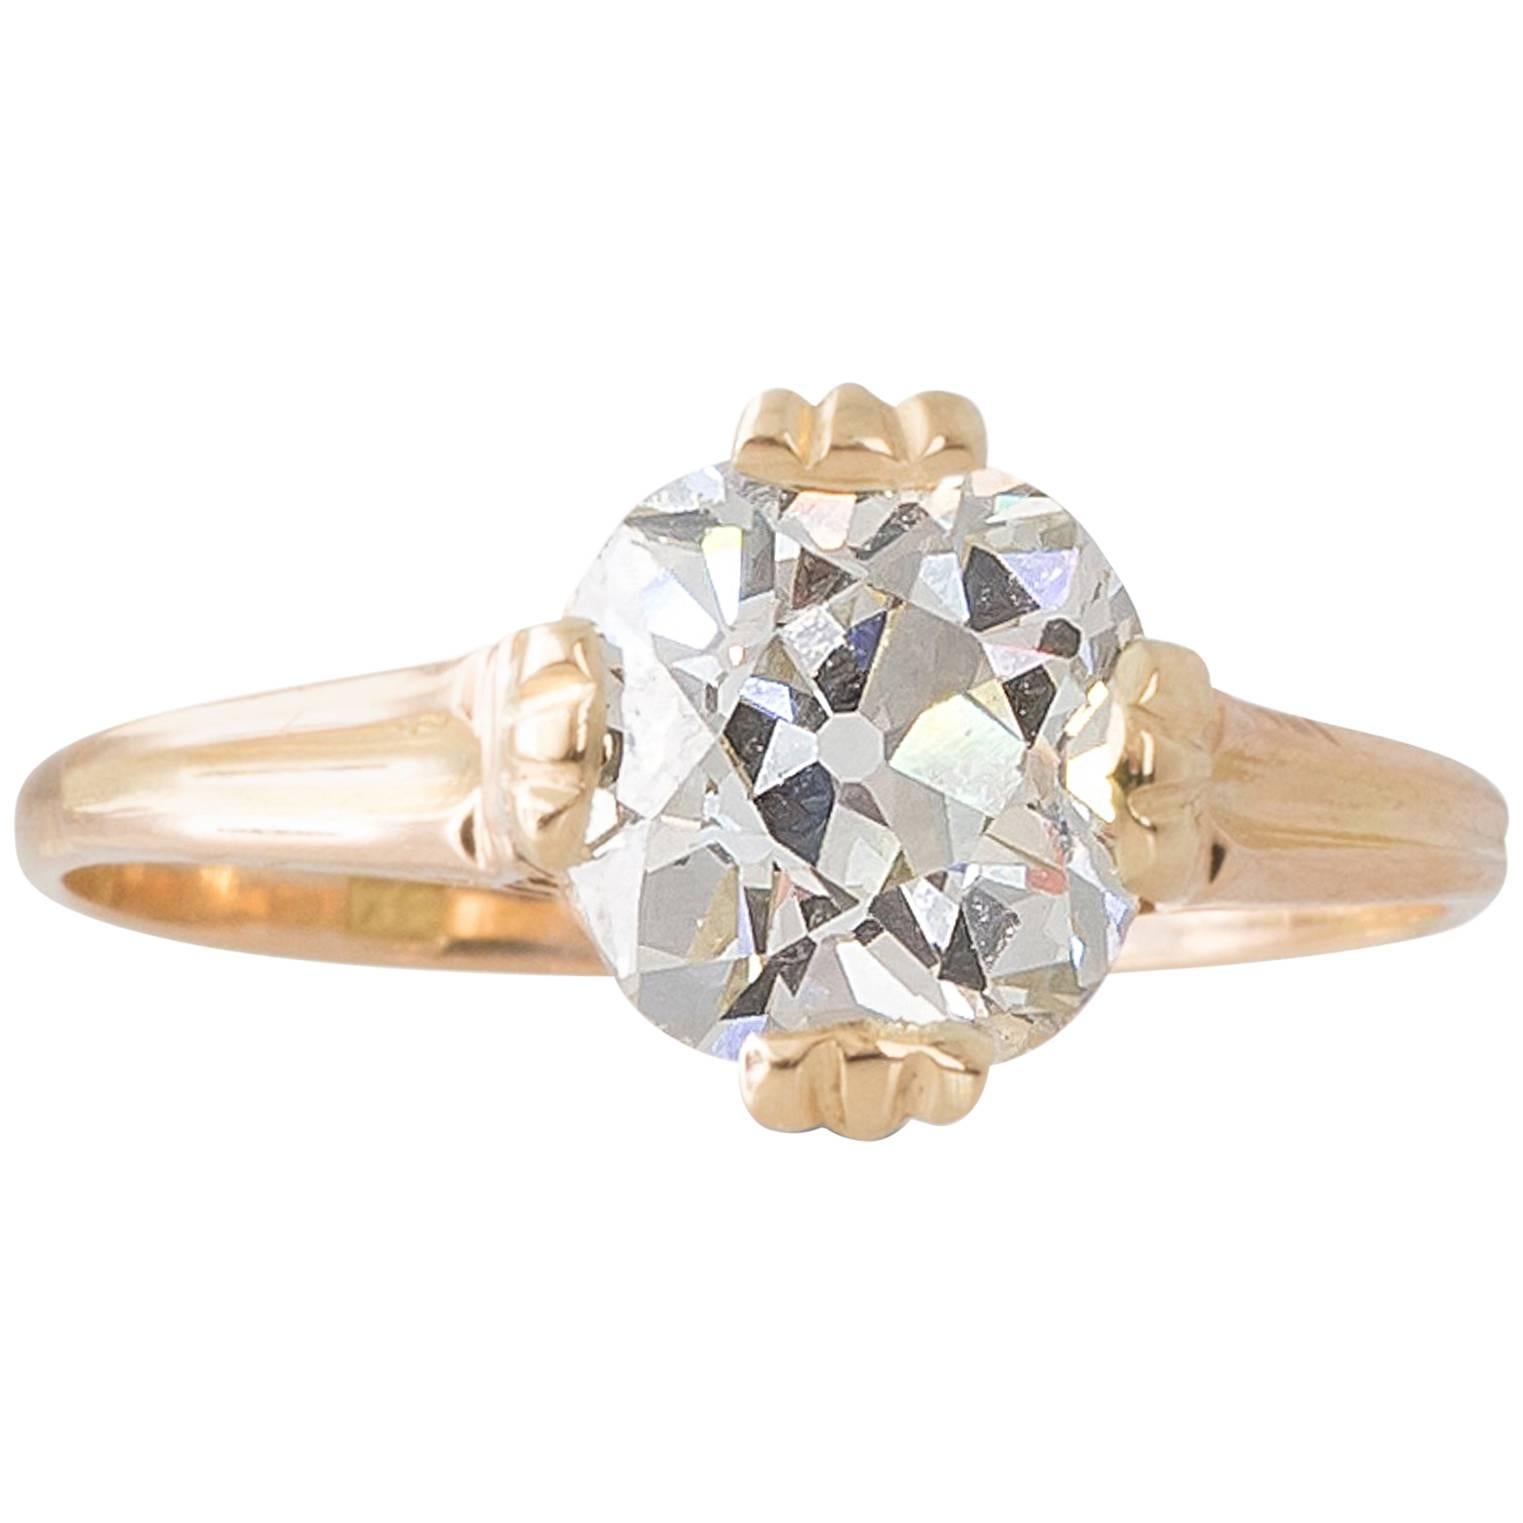 1.81 Carat Antique Cushion Cut GIA Certified Diamond Ring For Sale